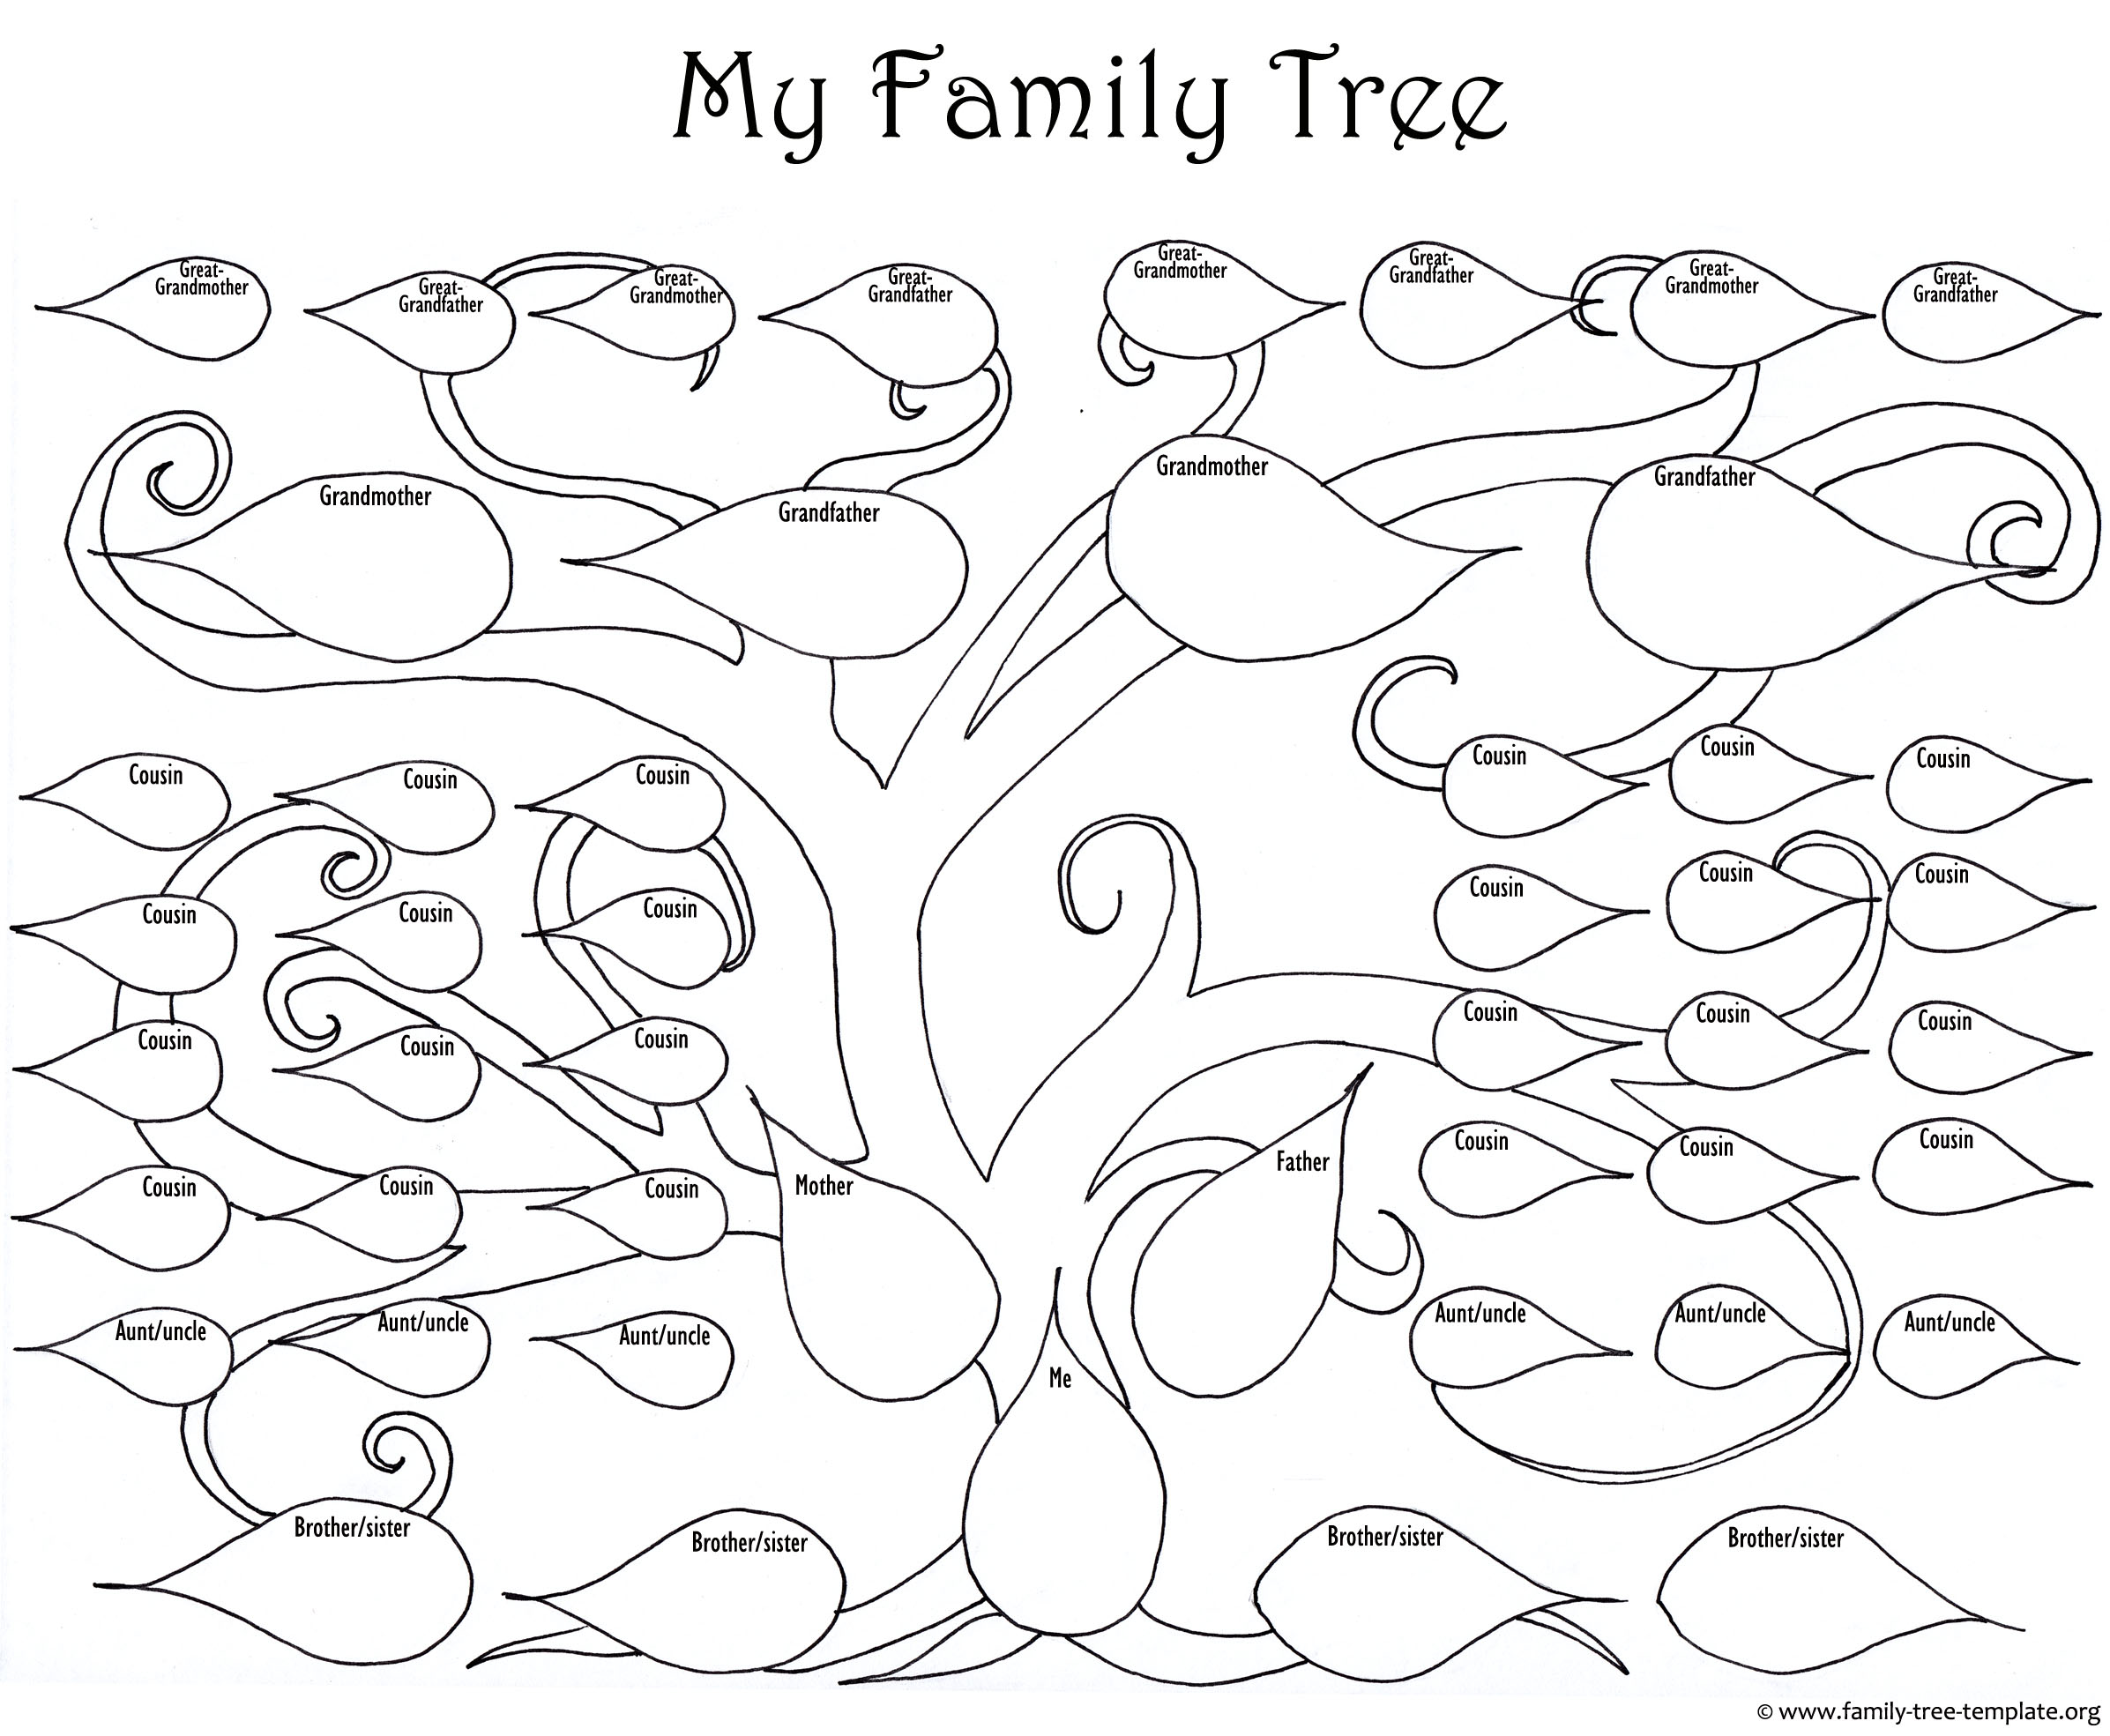 The large family tree chart for kids to print and color.